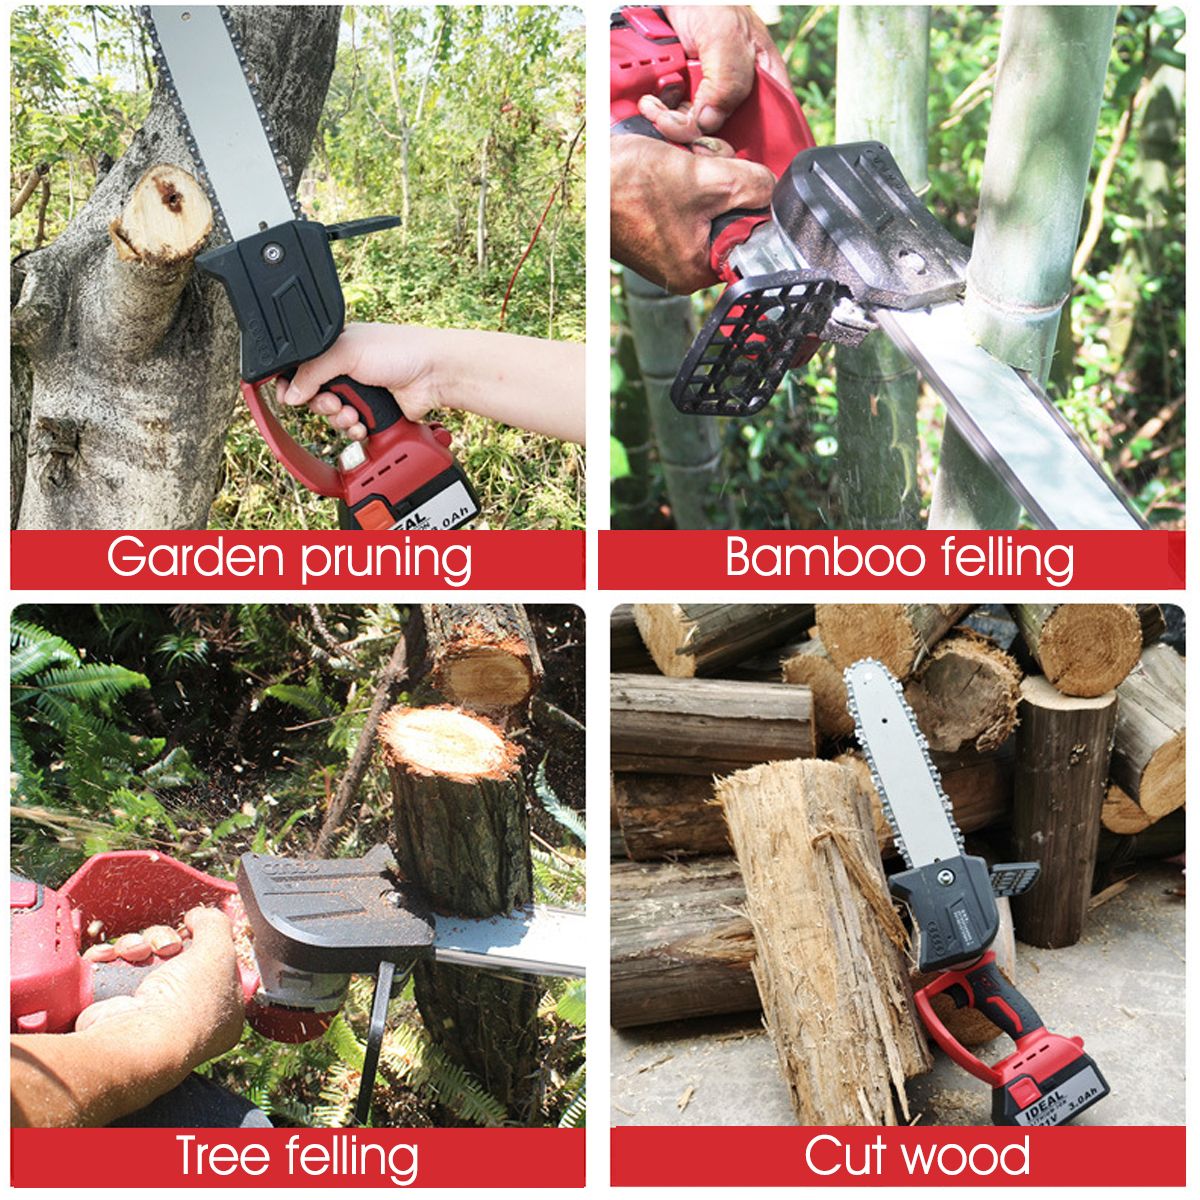 810-30Ah-Mini-Portable-Electric-Cordless-Chainsaw-Chain-Saw-One-Hand-Saw-Woodworking-Garden-Cutting--1699122